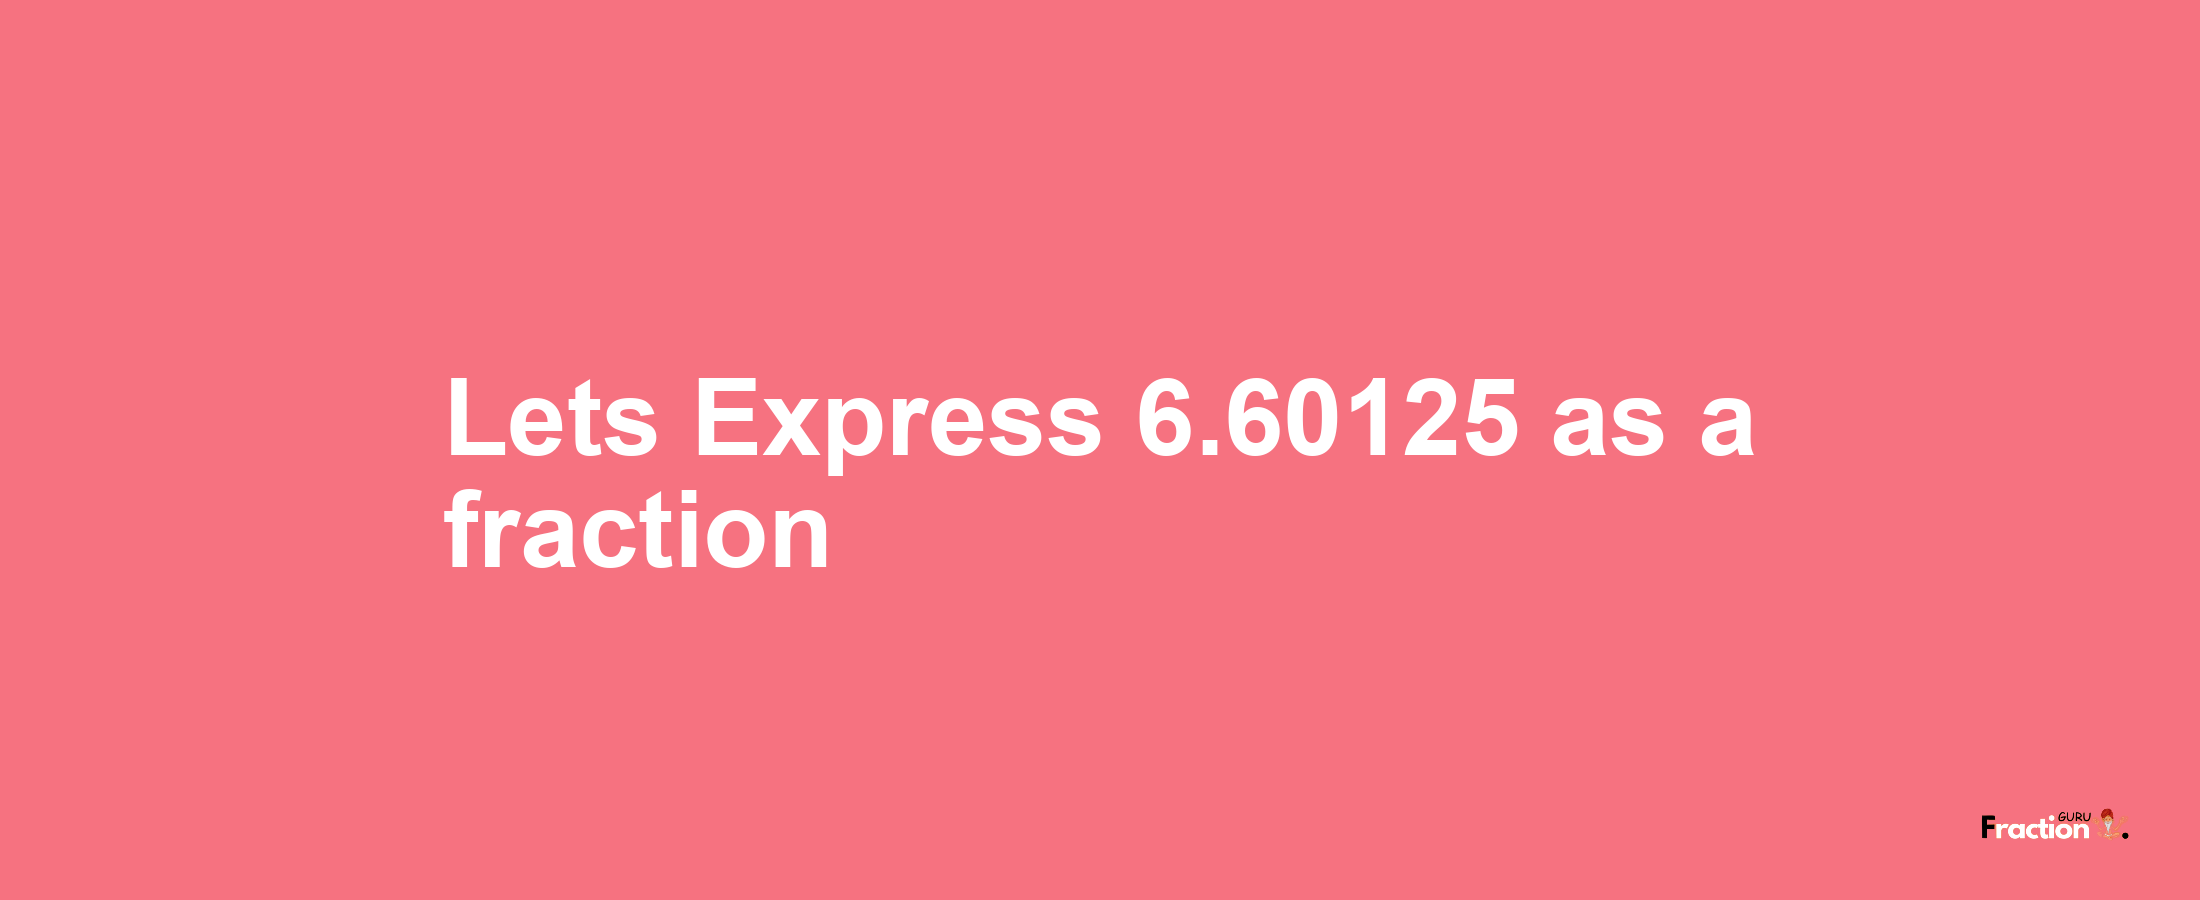 Lets Express 6.60125 as afraction